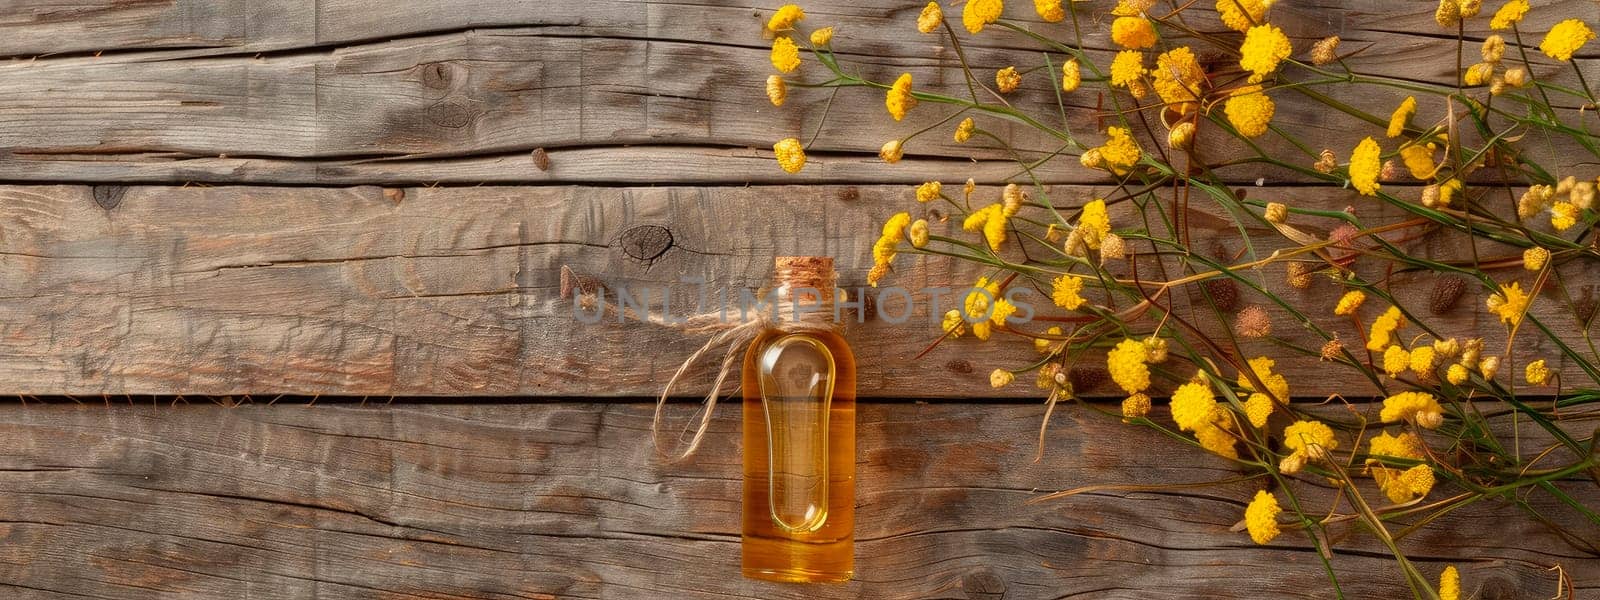 immortelle essential oil in a bottle. Selective focus. Nature.